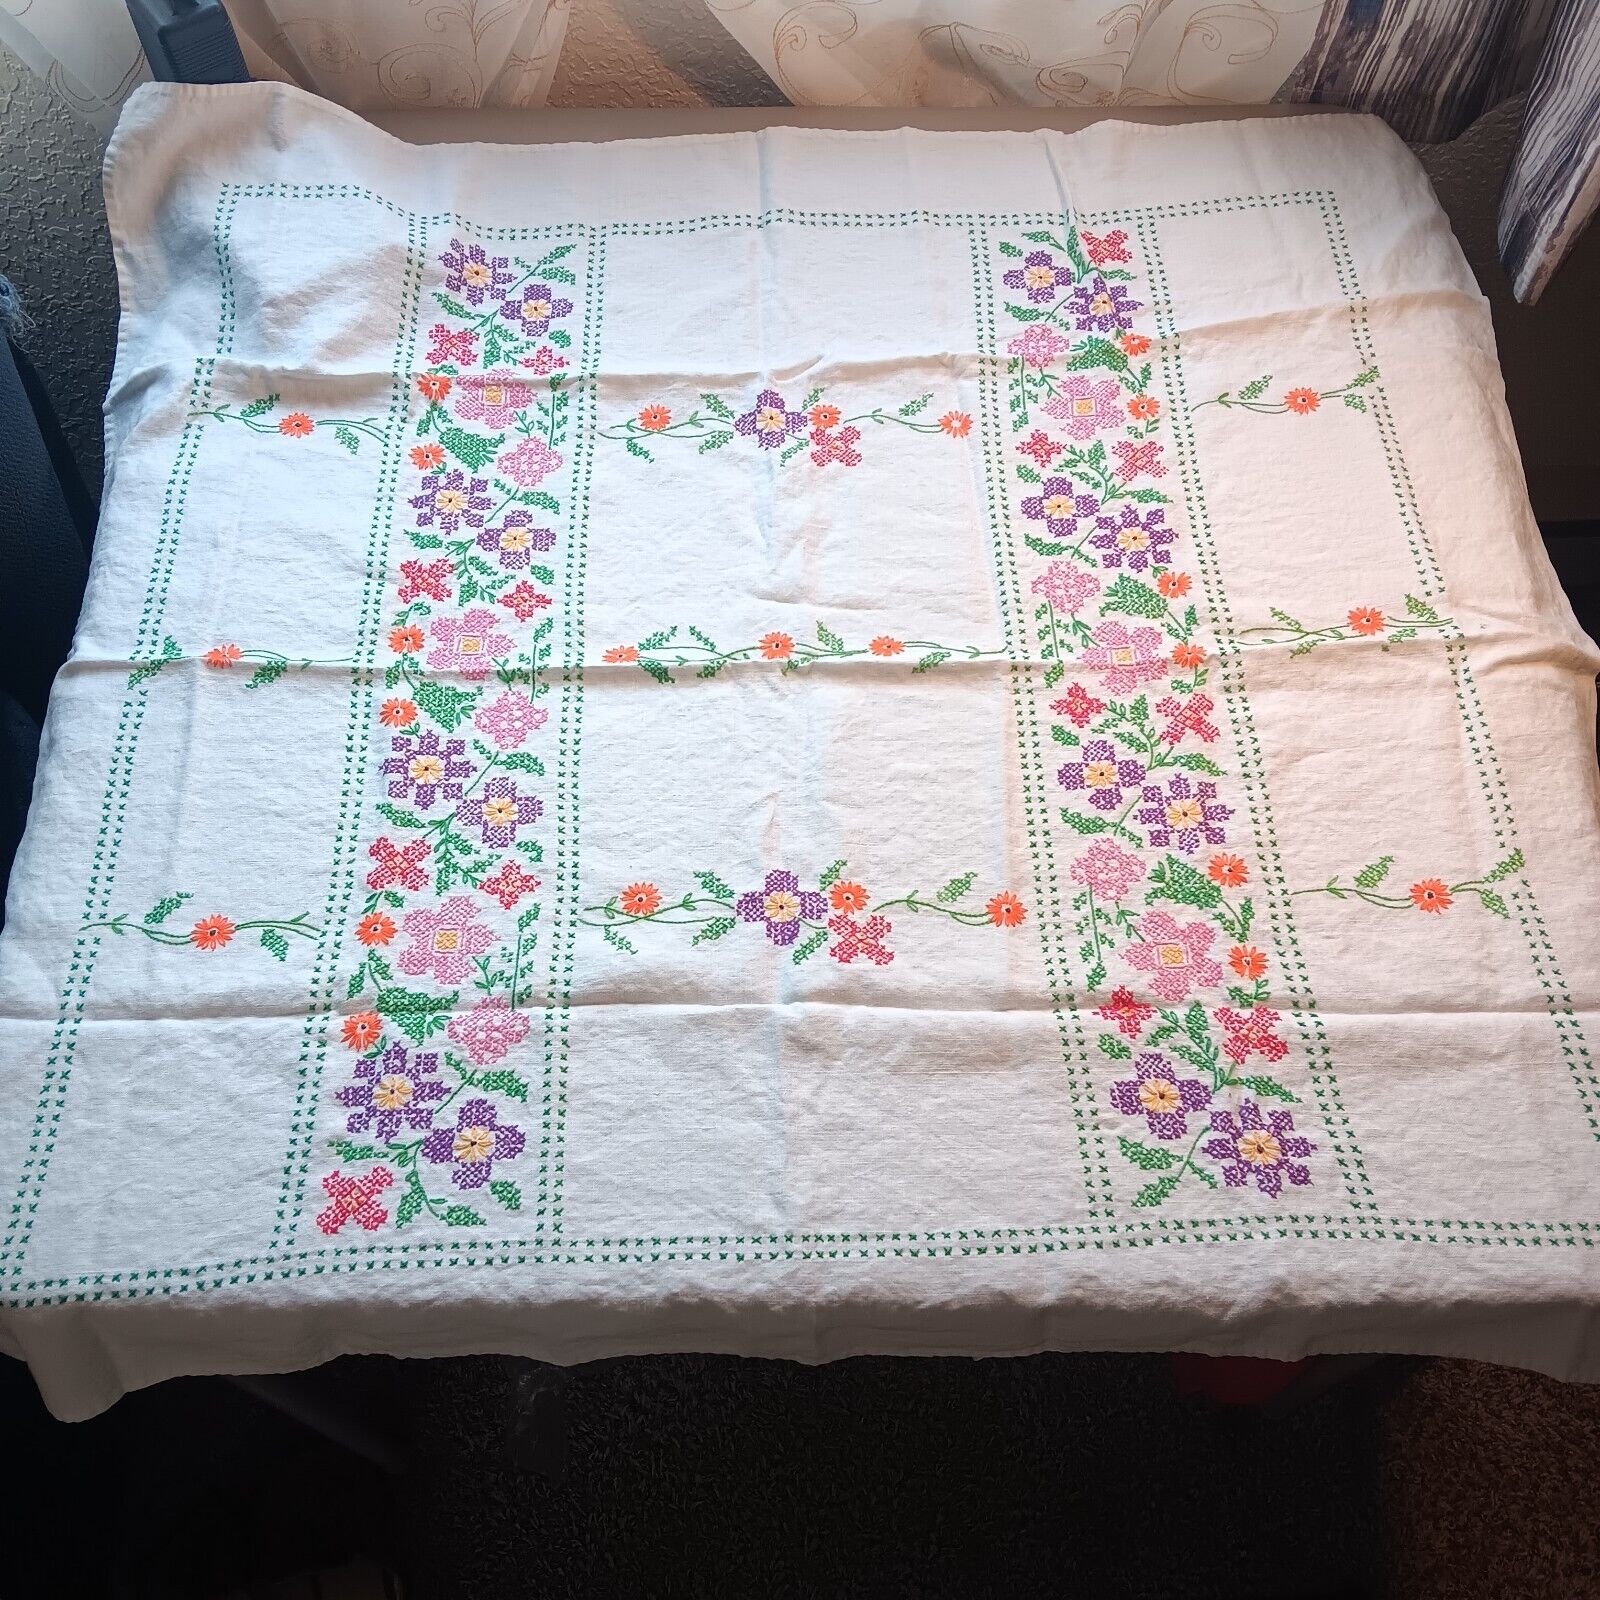 Vintage cross stitched floral handmade square card table cloth cottagecore decor